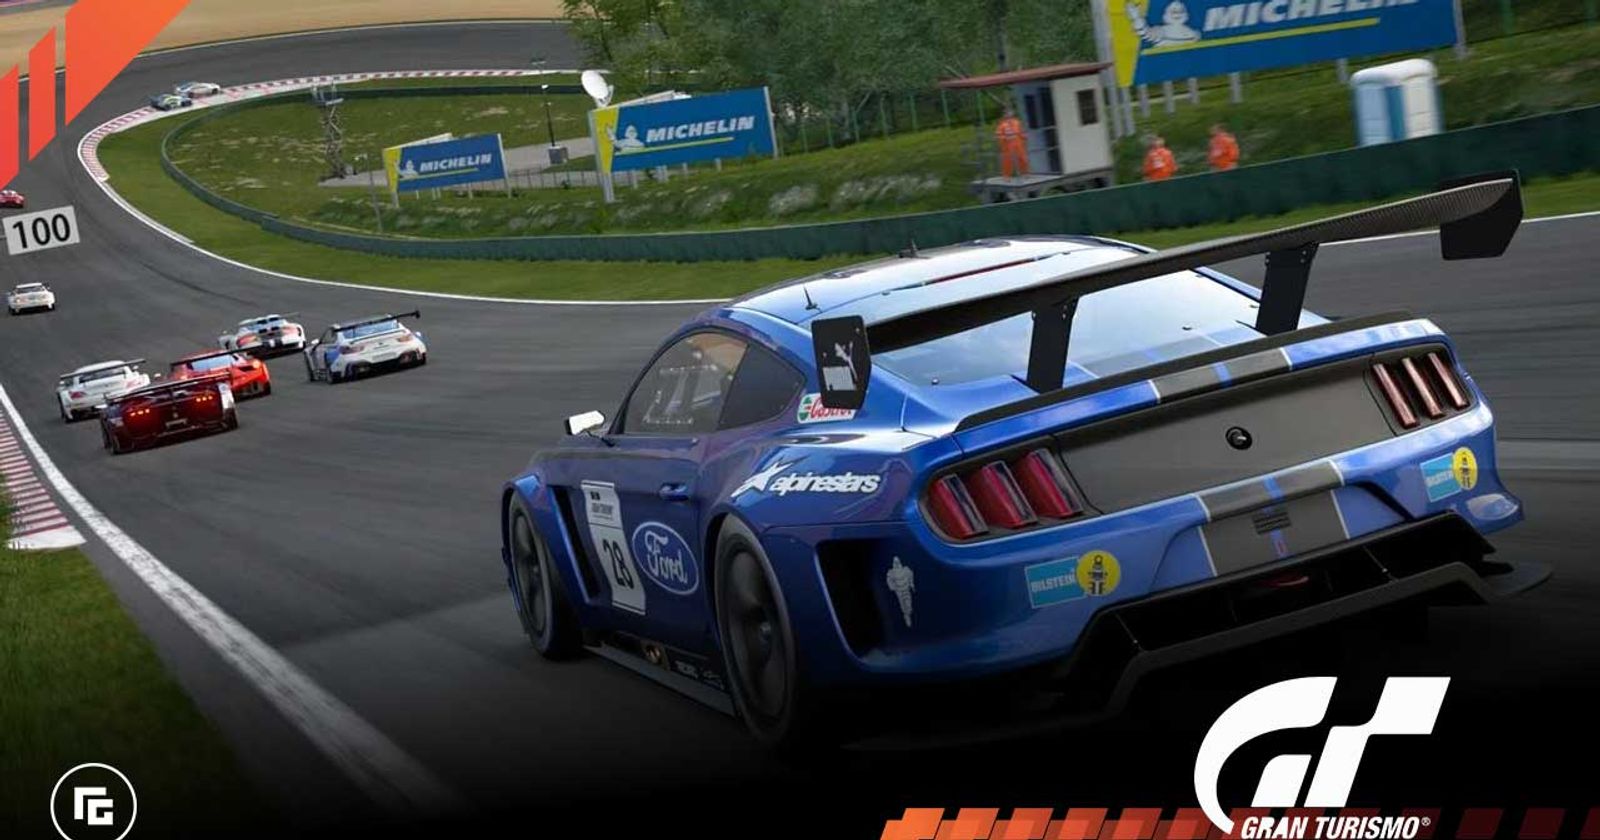 Gran Turismo 7: Pre-order items and 25th Anniversary Edition detailed –  PlayStation.Blog